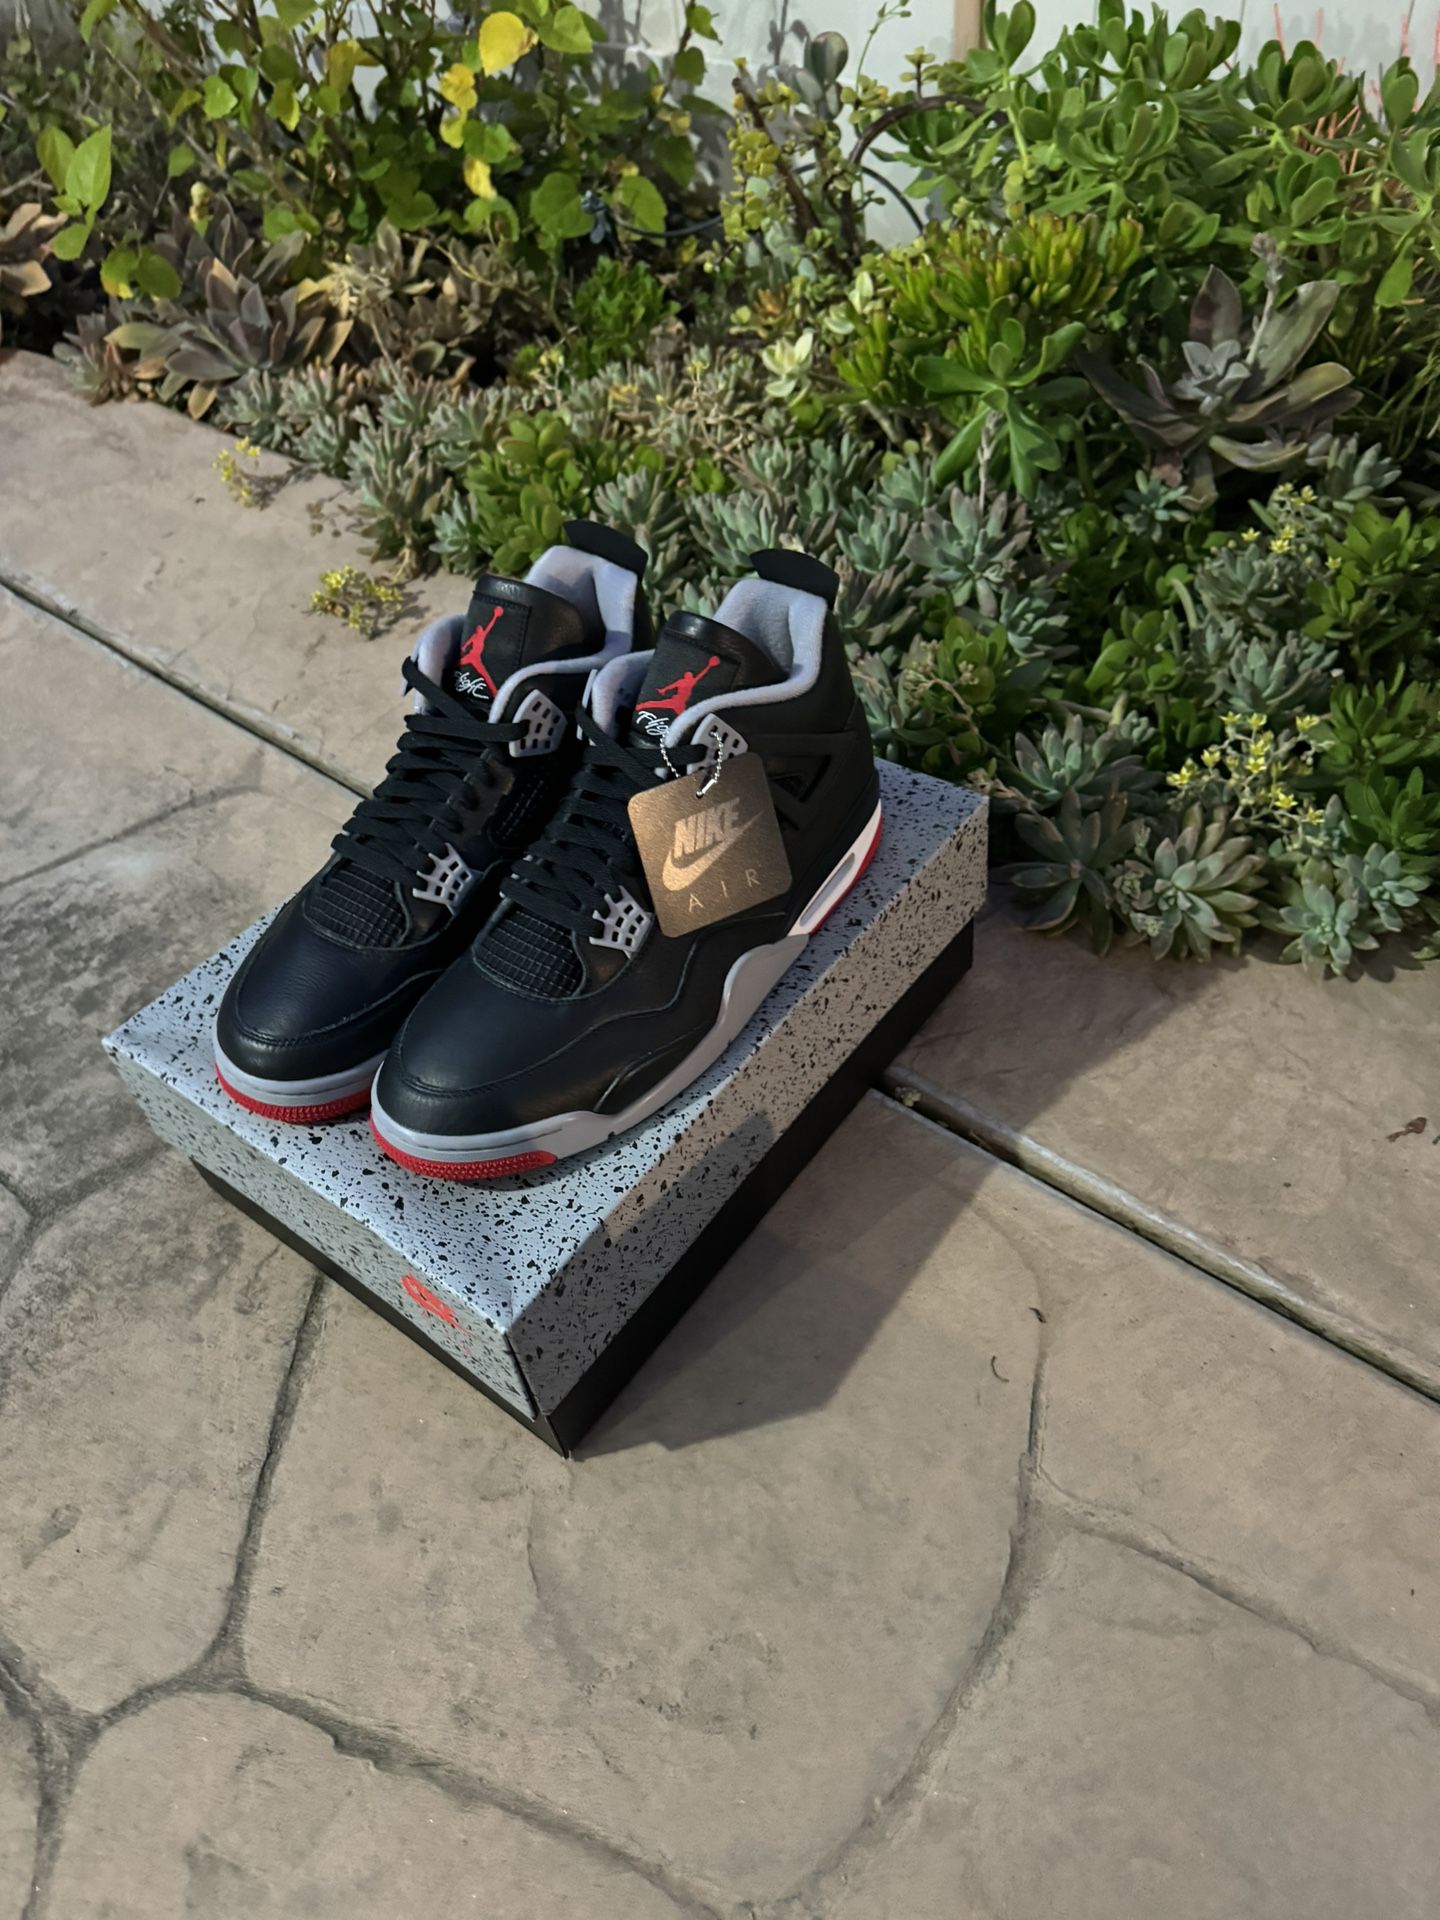 Jordan 4 Bred Reimagined Size 12.5 Brand New With Box 